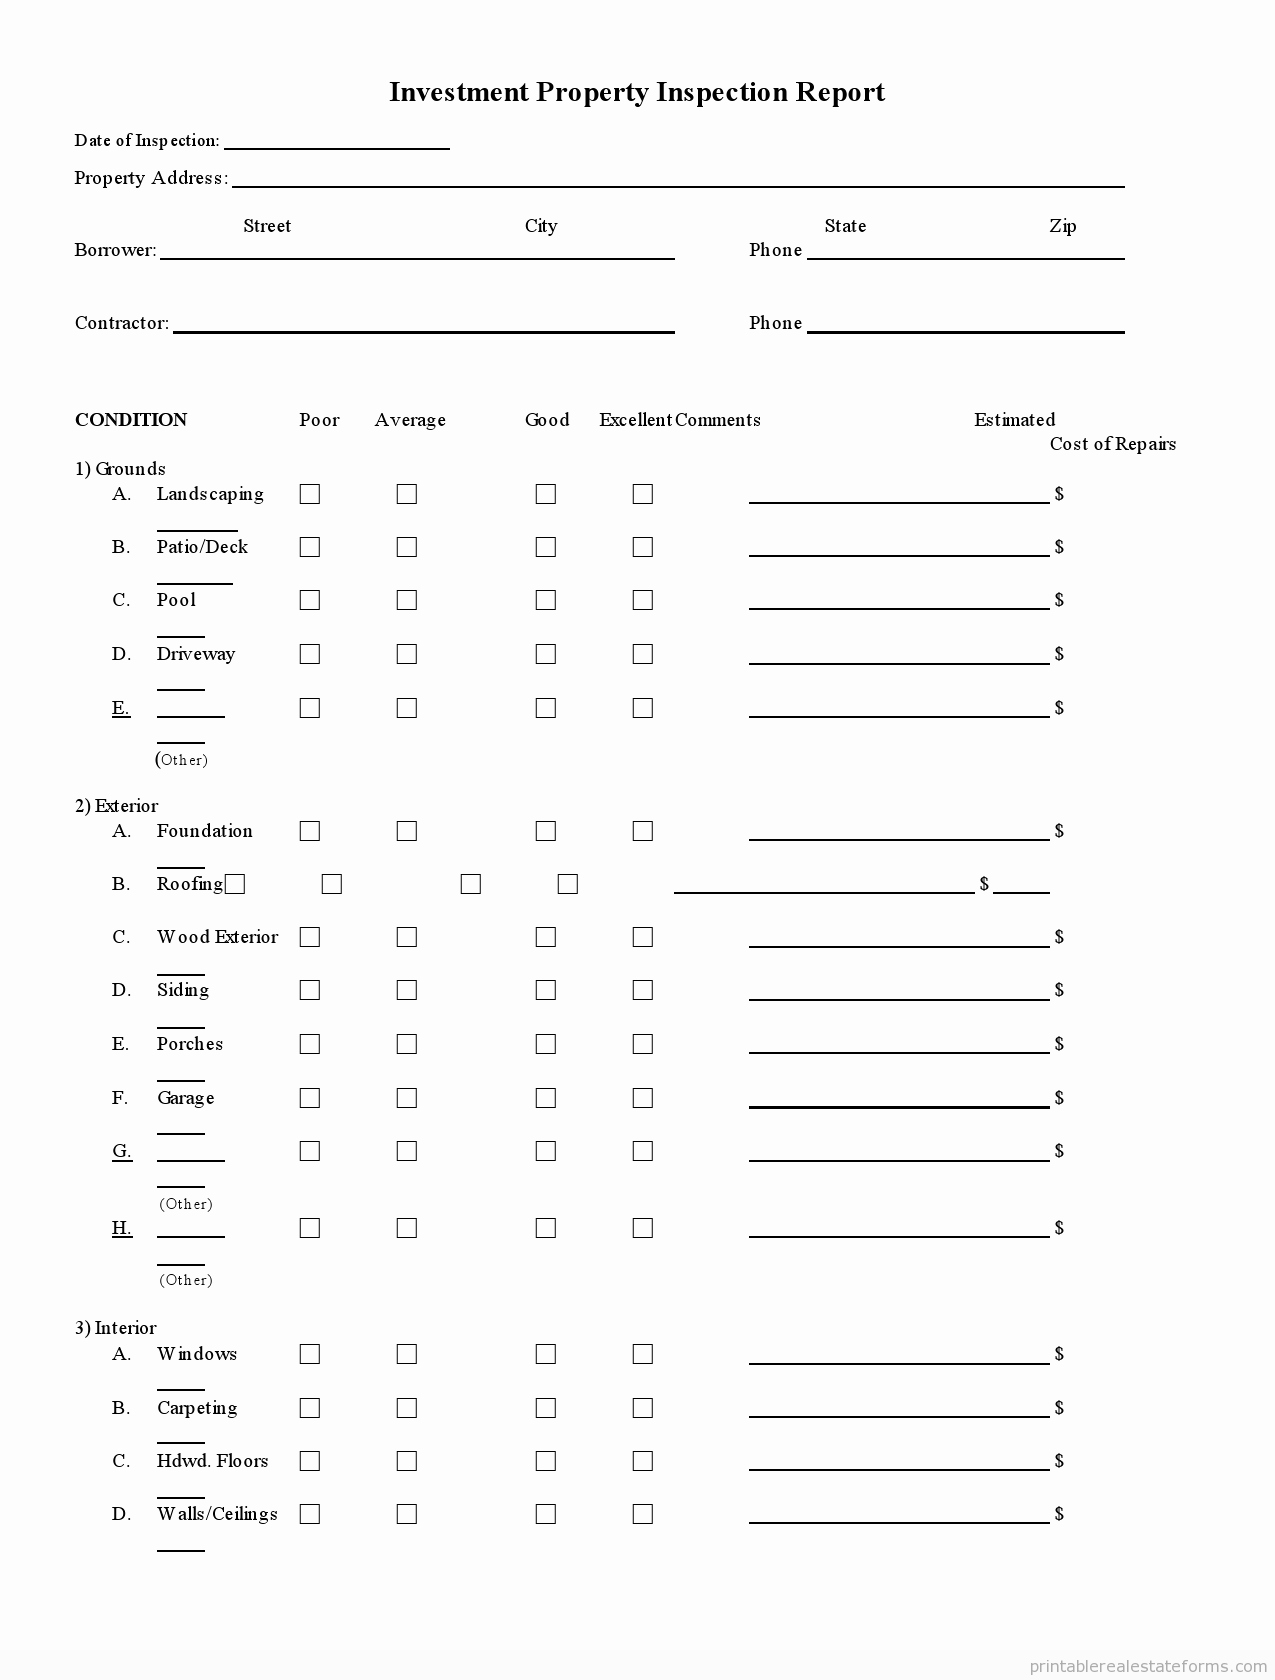 Electrical Inspection Report Template Awesome Free Printable Investment Property Inspection Report